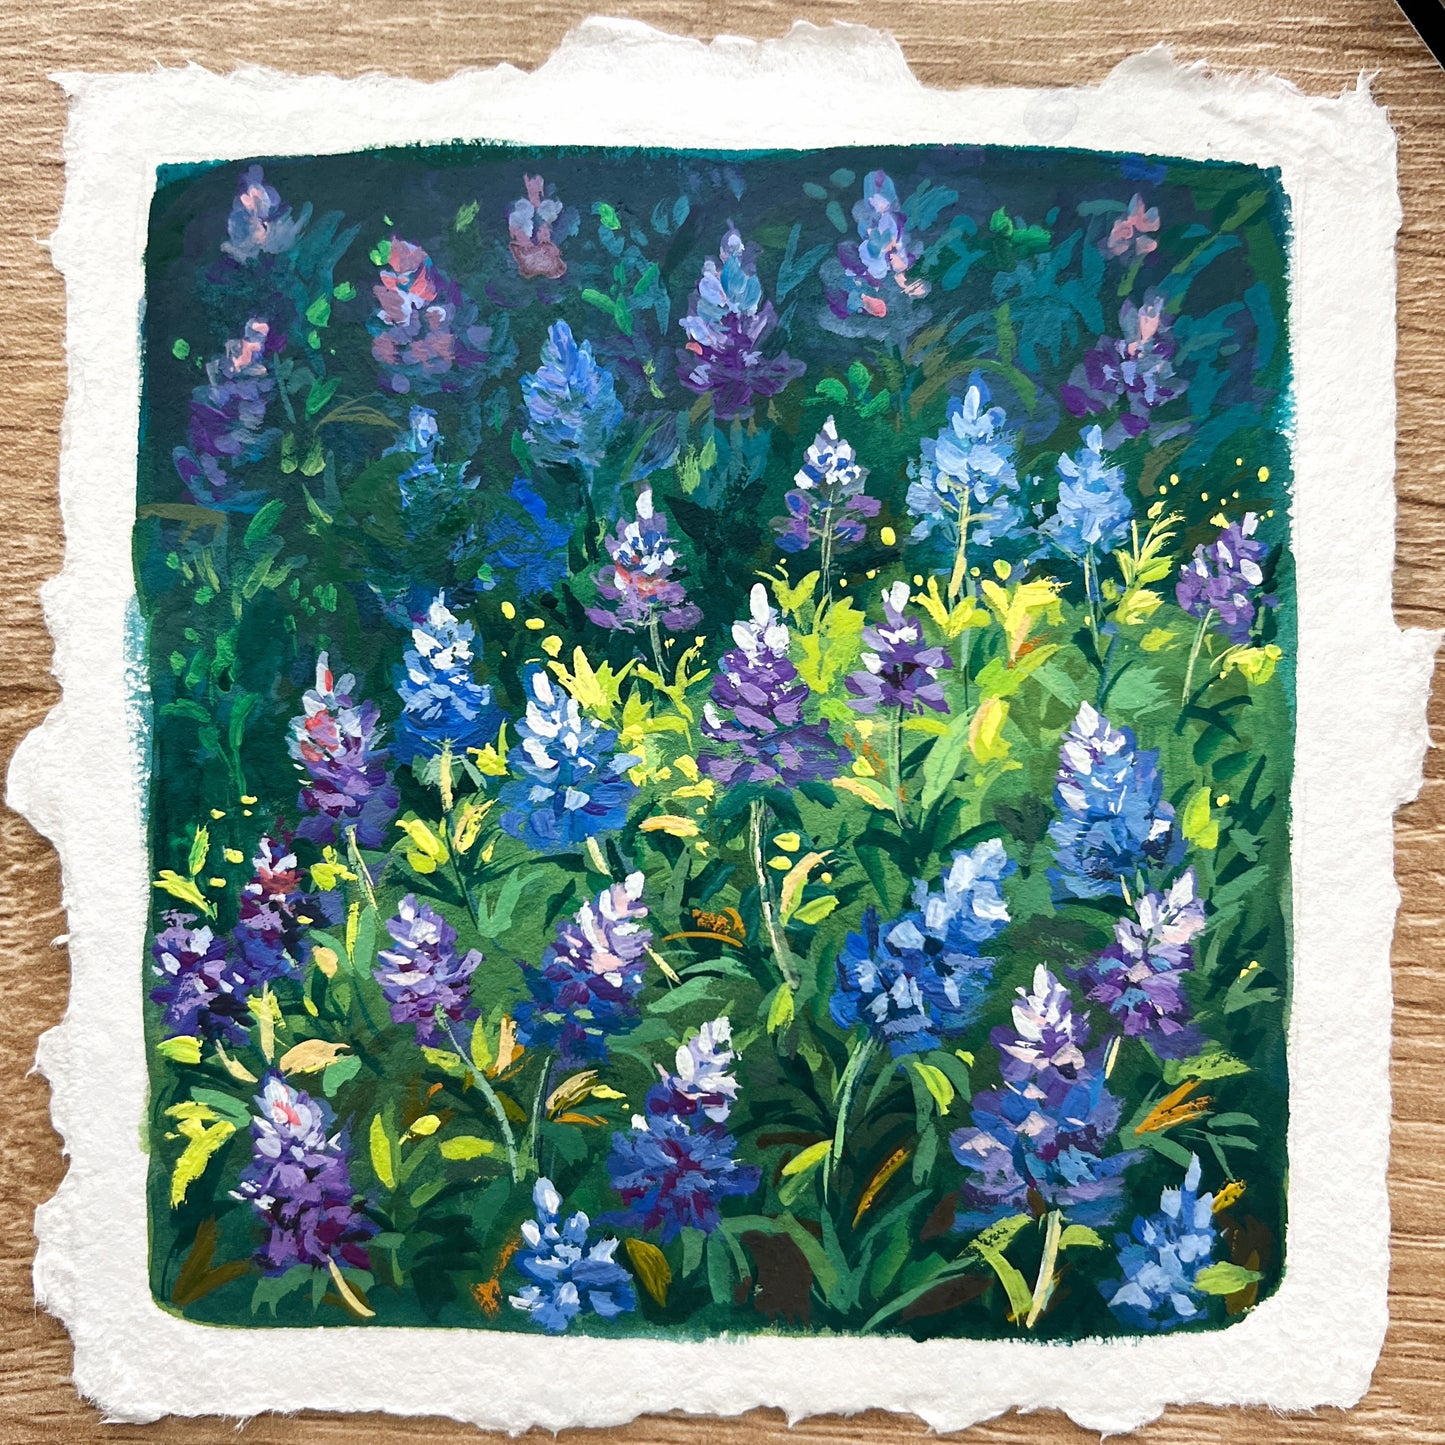 Original painting- State's flowers series- Texas State's flower- Bluebonnet